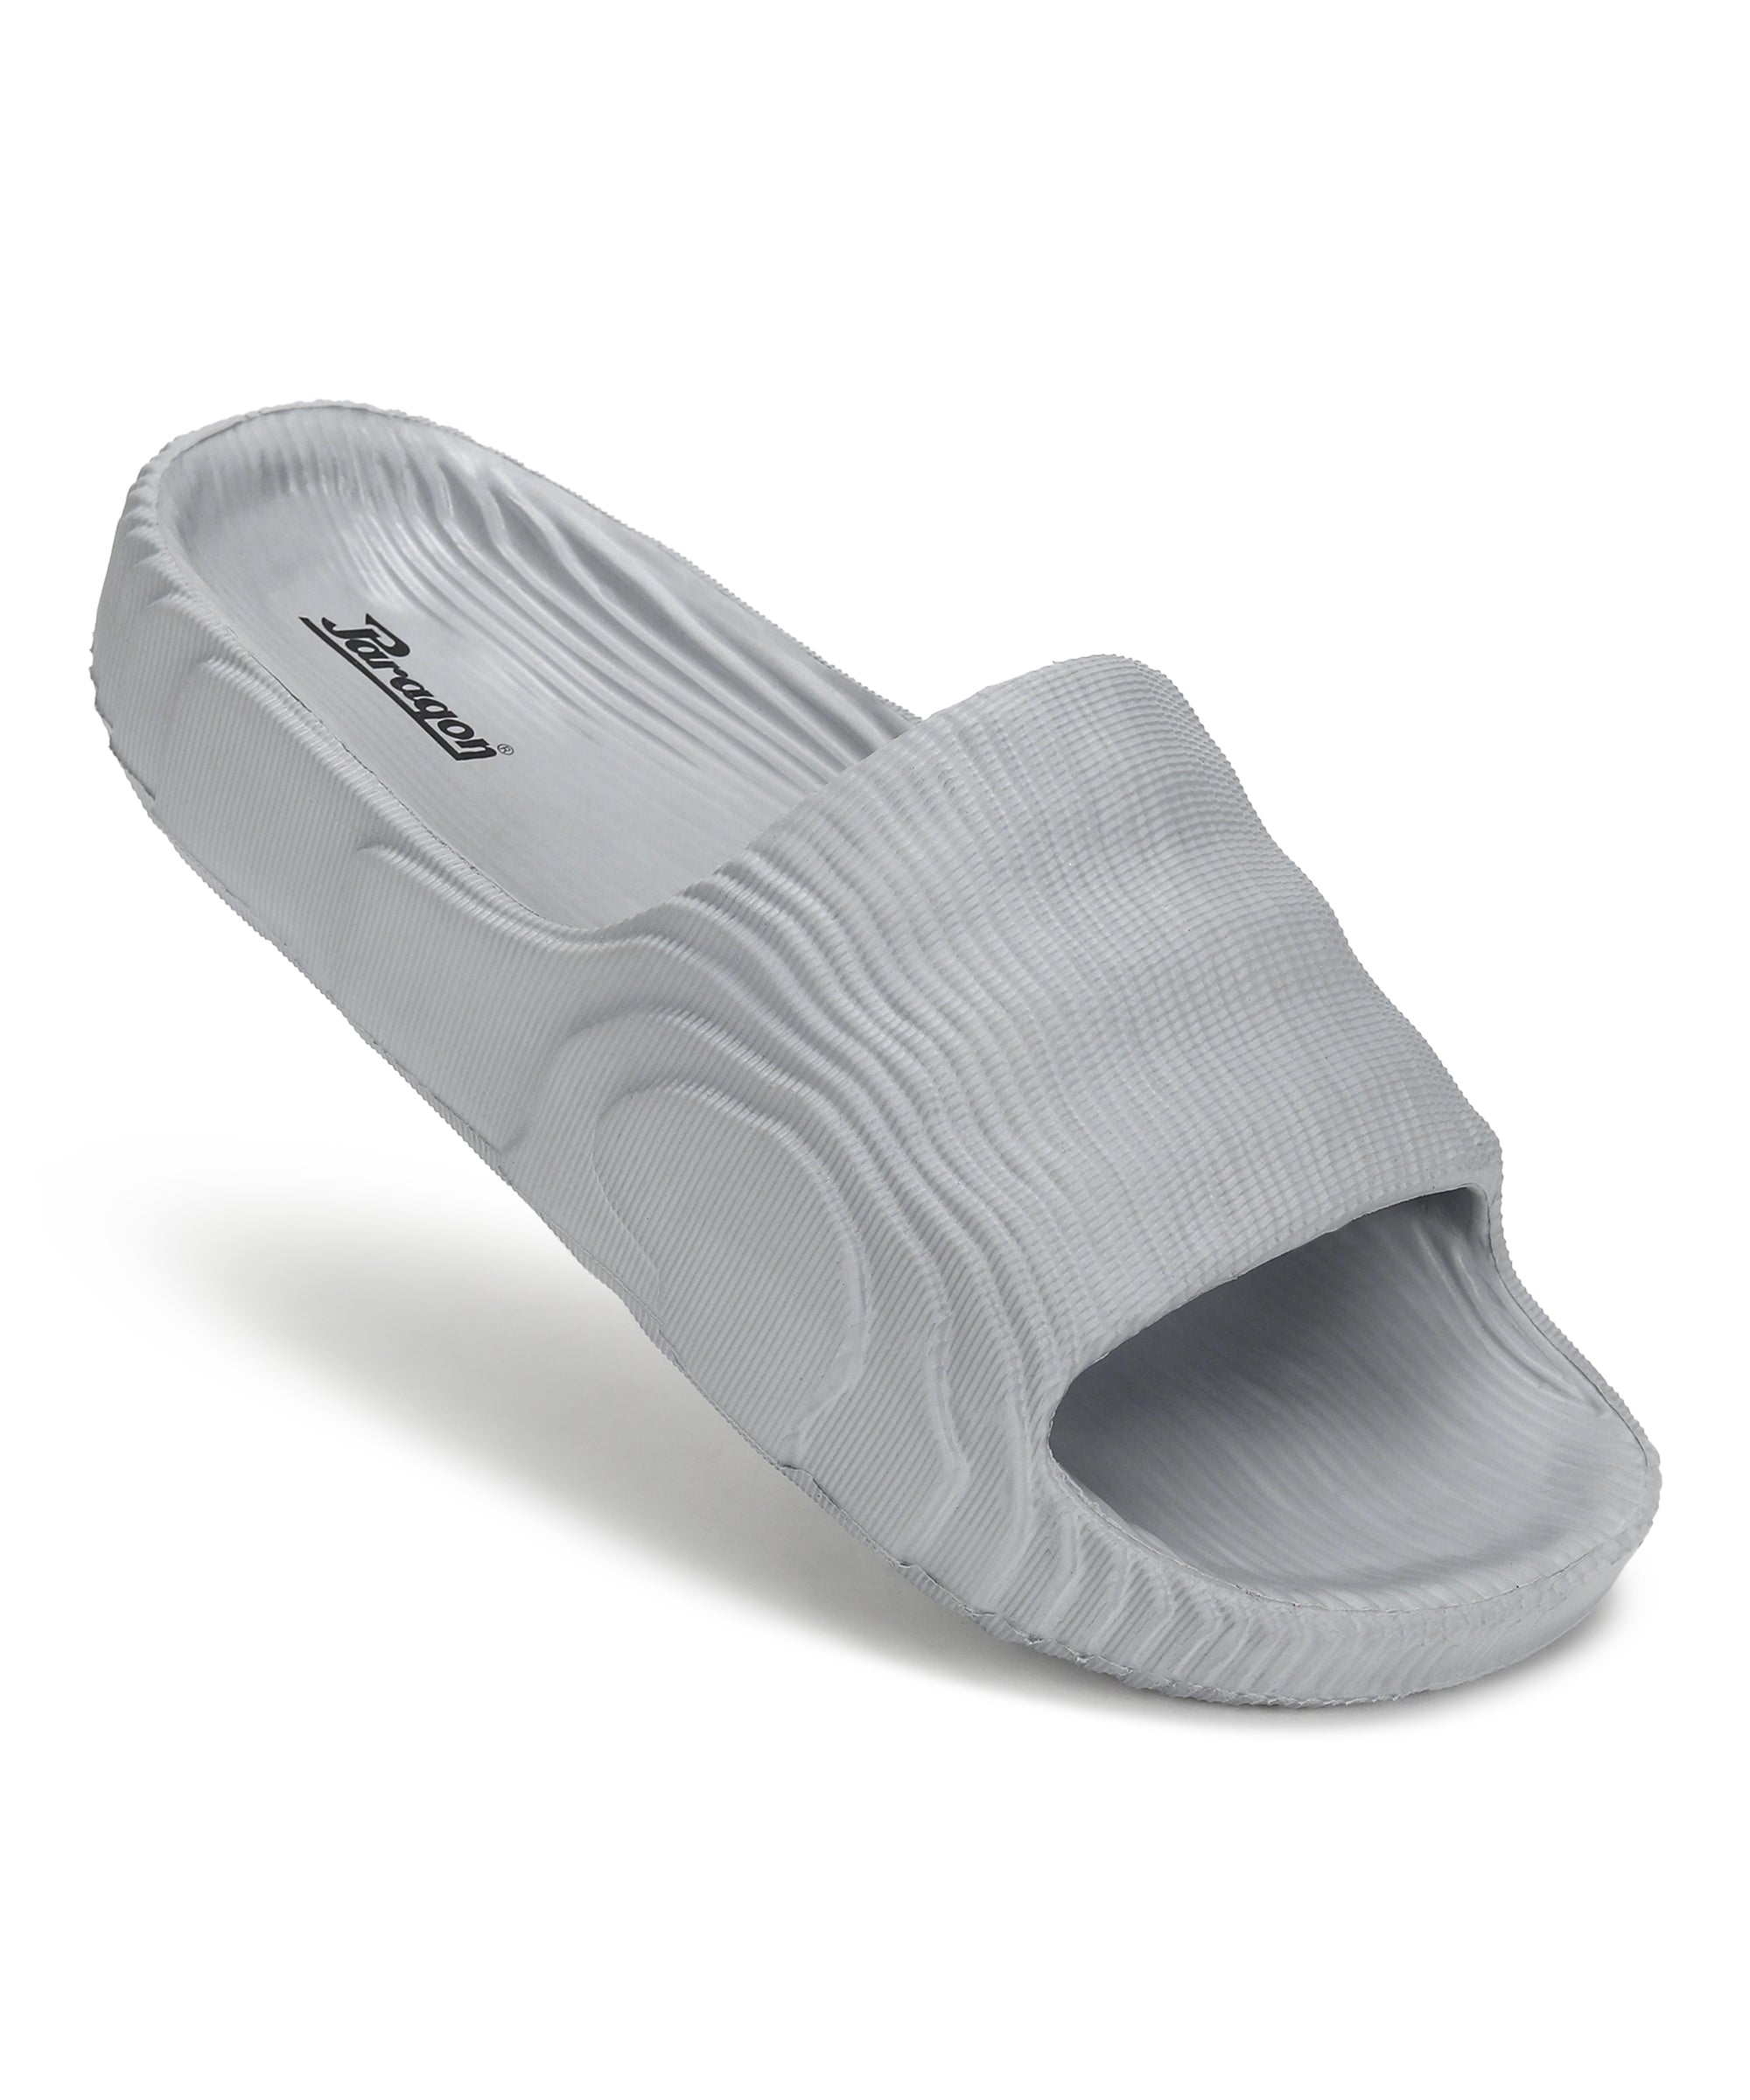 Vertex 6175 Gents Slipper by Paragon Polymers Pvt Ltd. Supplier from India.  Product Id 1352410.